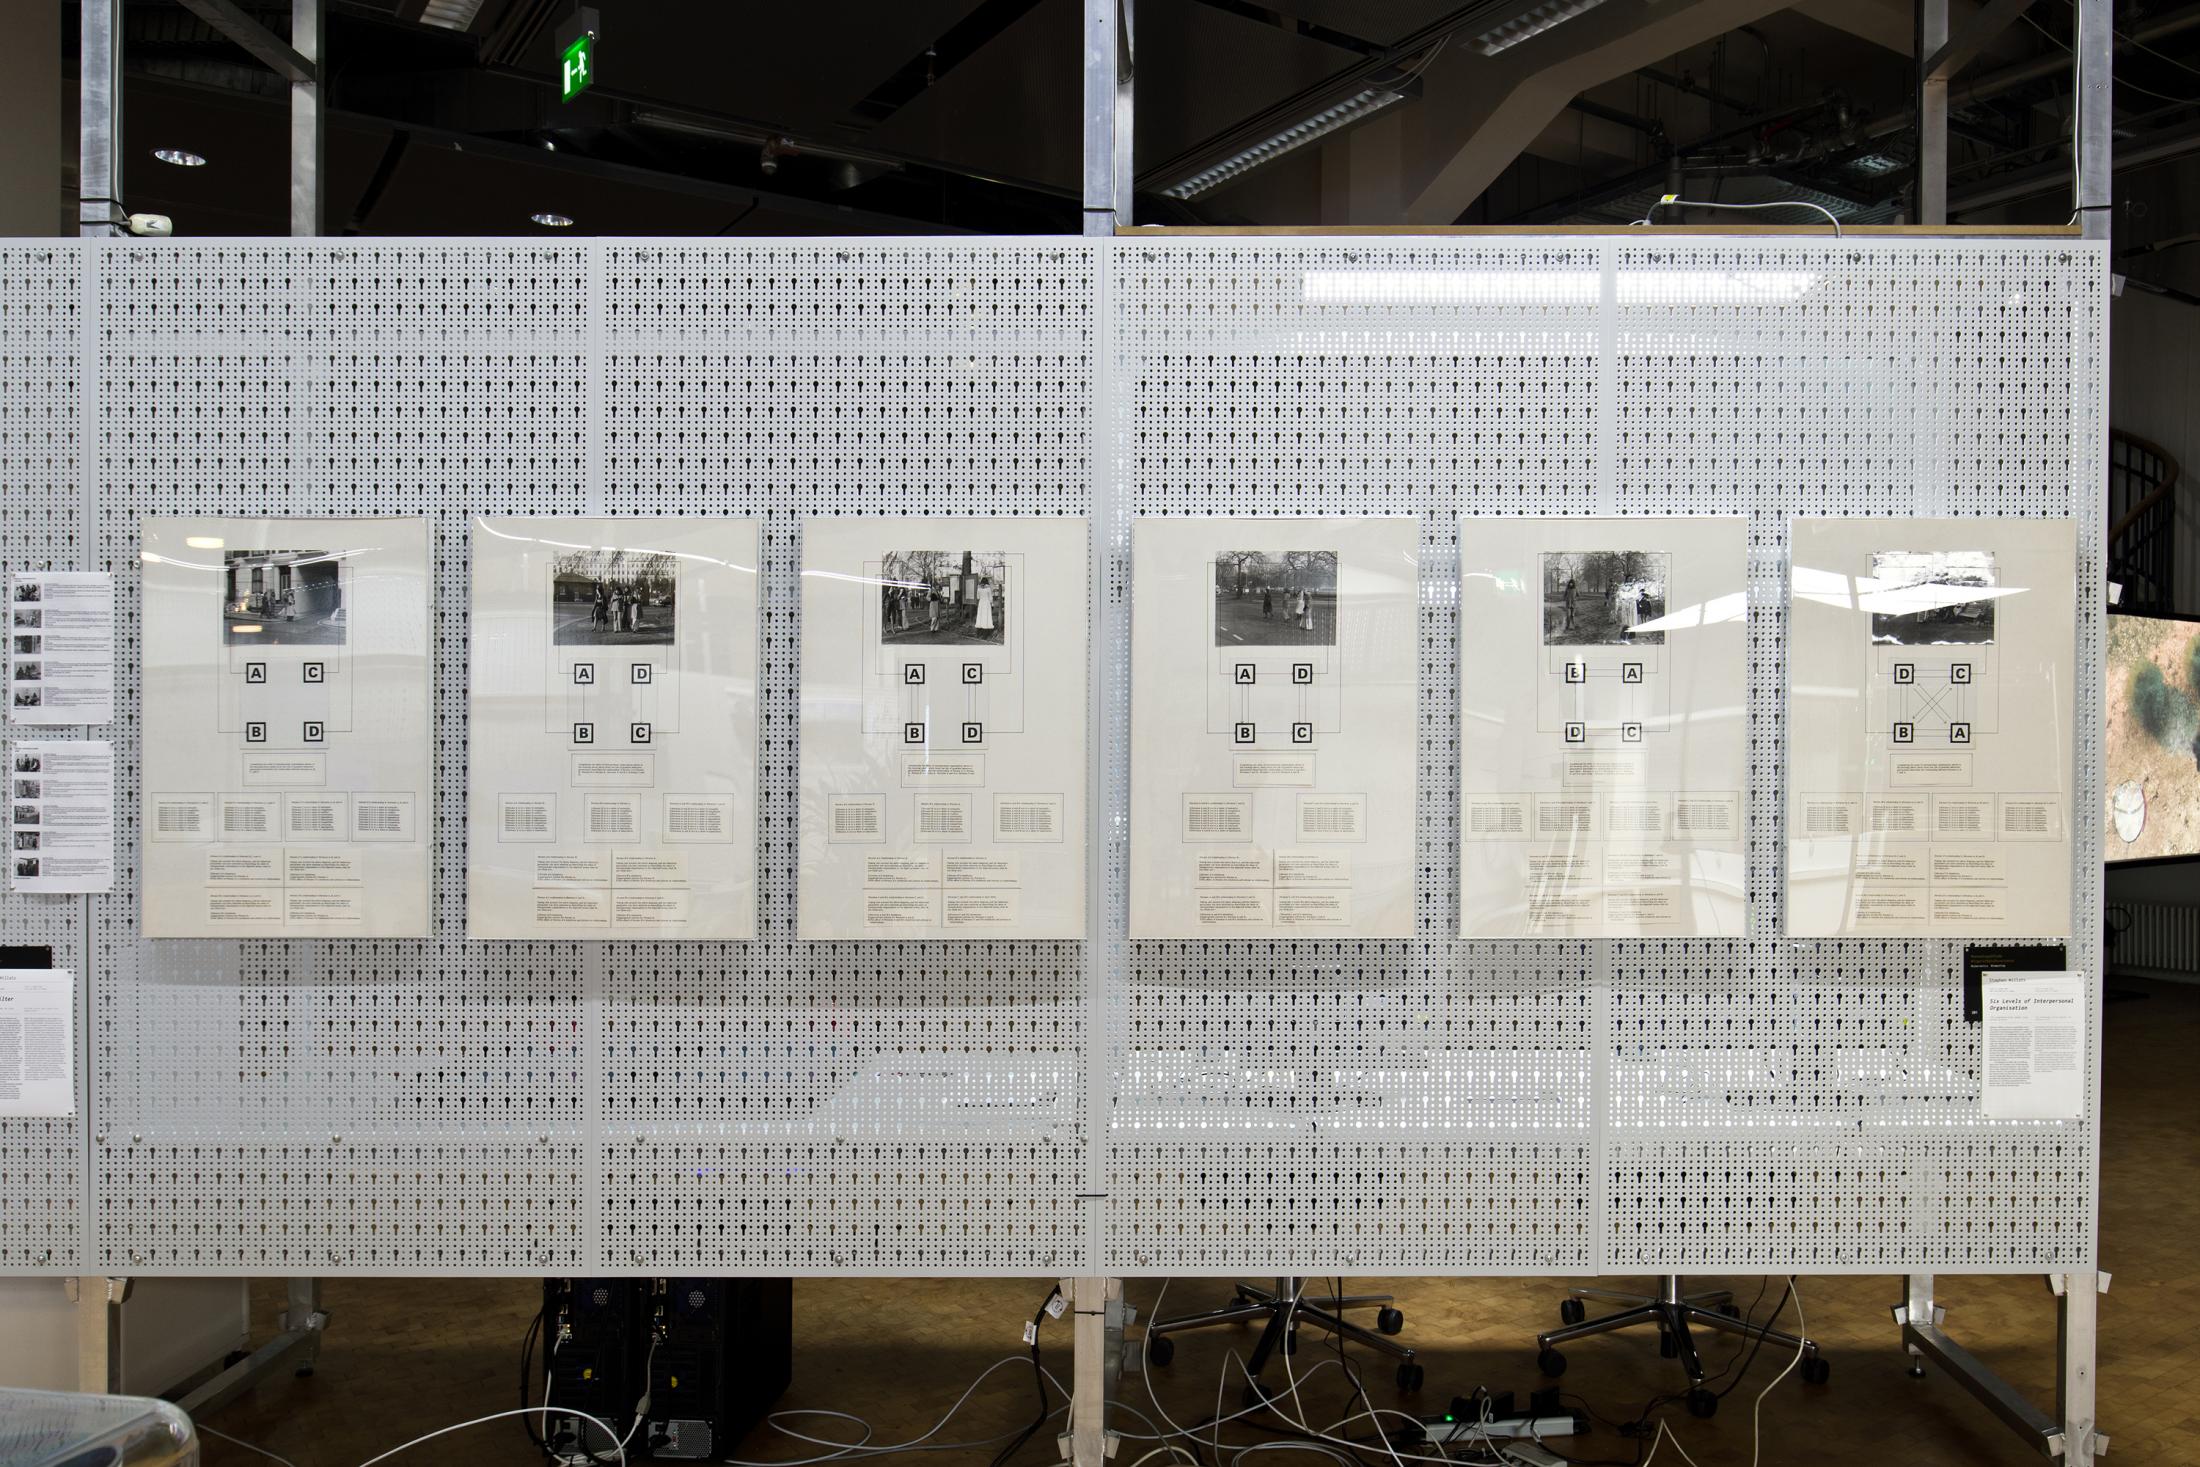 The figure shows 6 photographs with drawings hung on a white grid structure